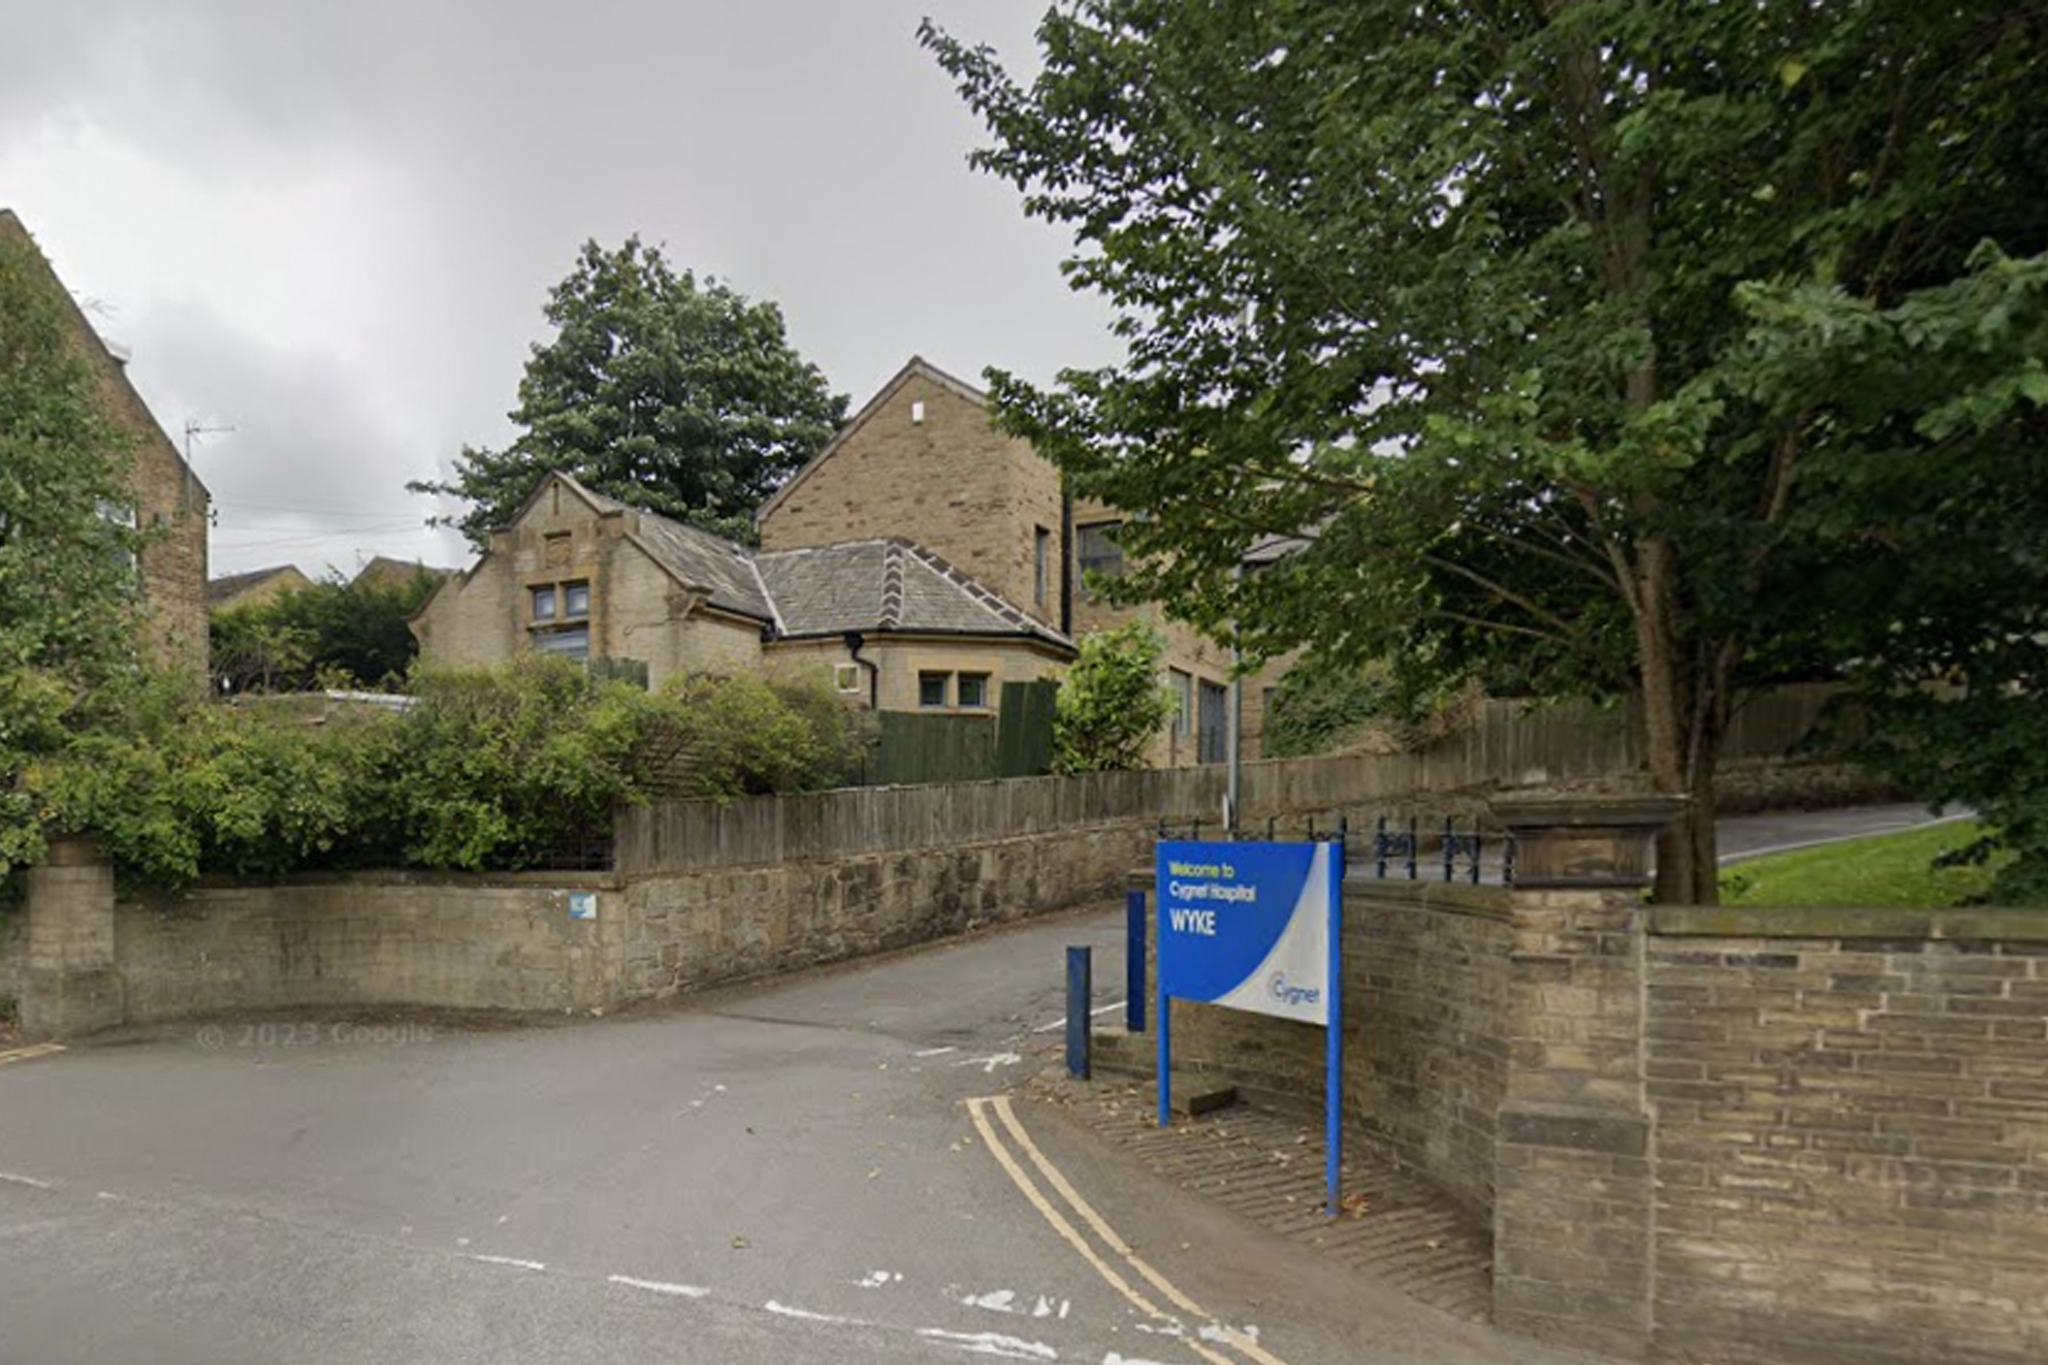 Cygnet Hospital Wyke, in West Yorkshire, has been sanctioned by the NHS safety watchdog